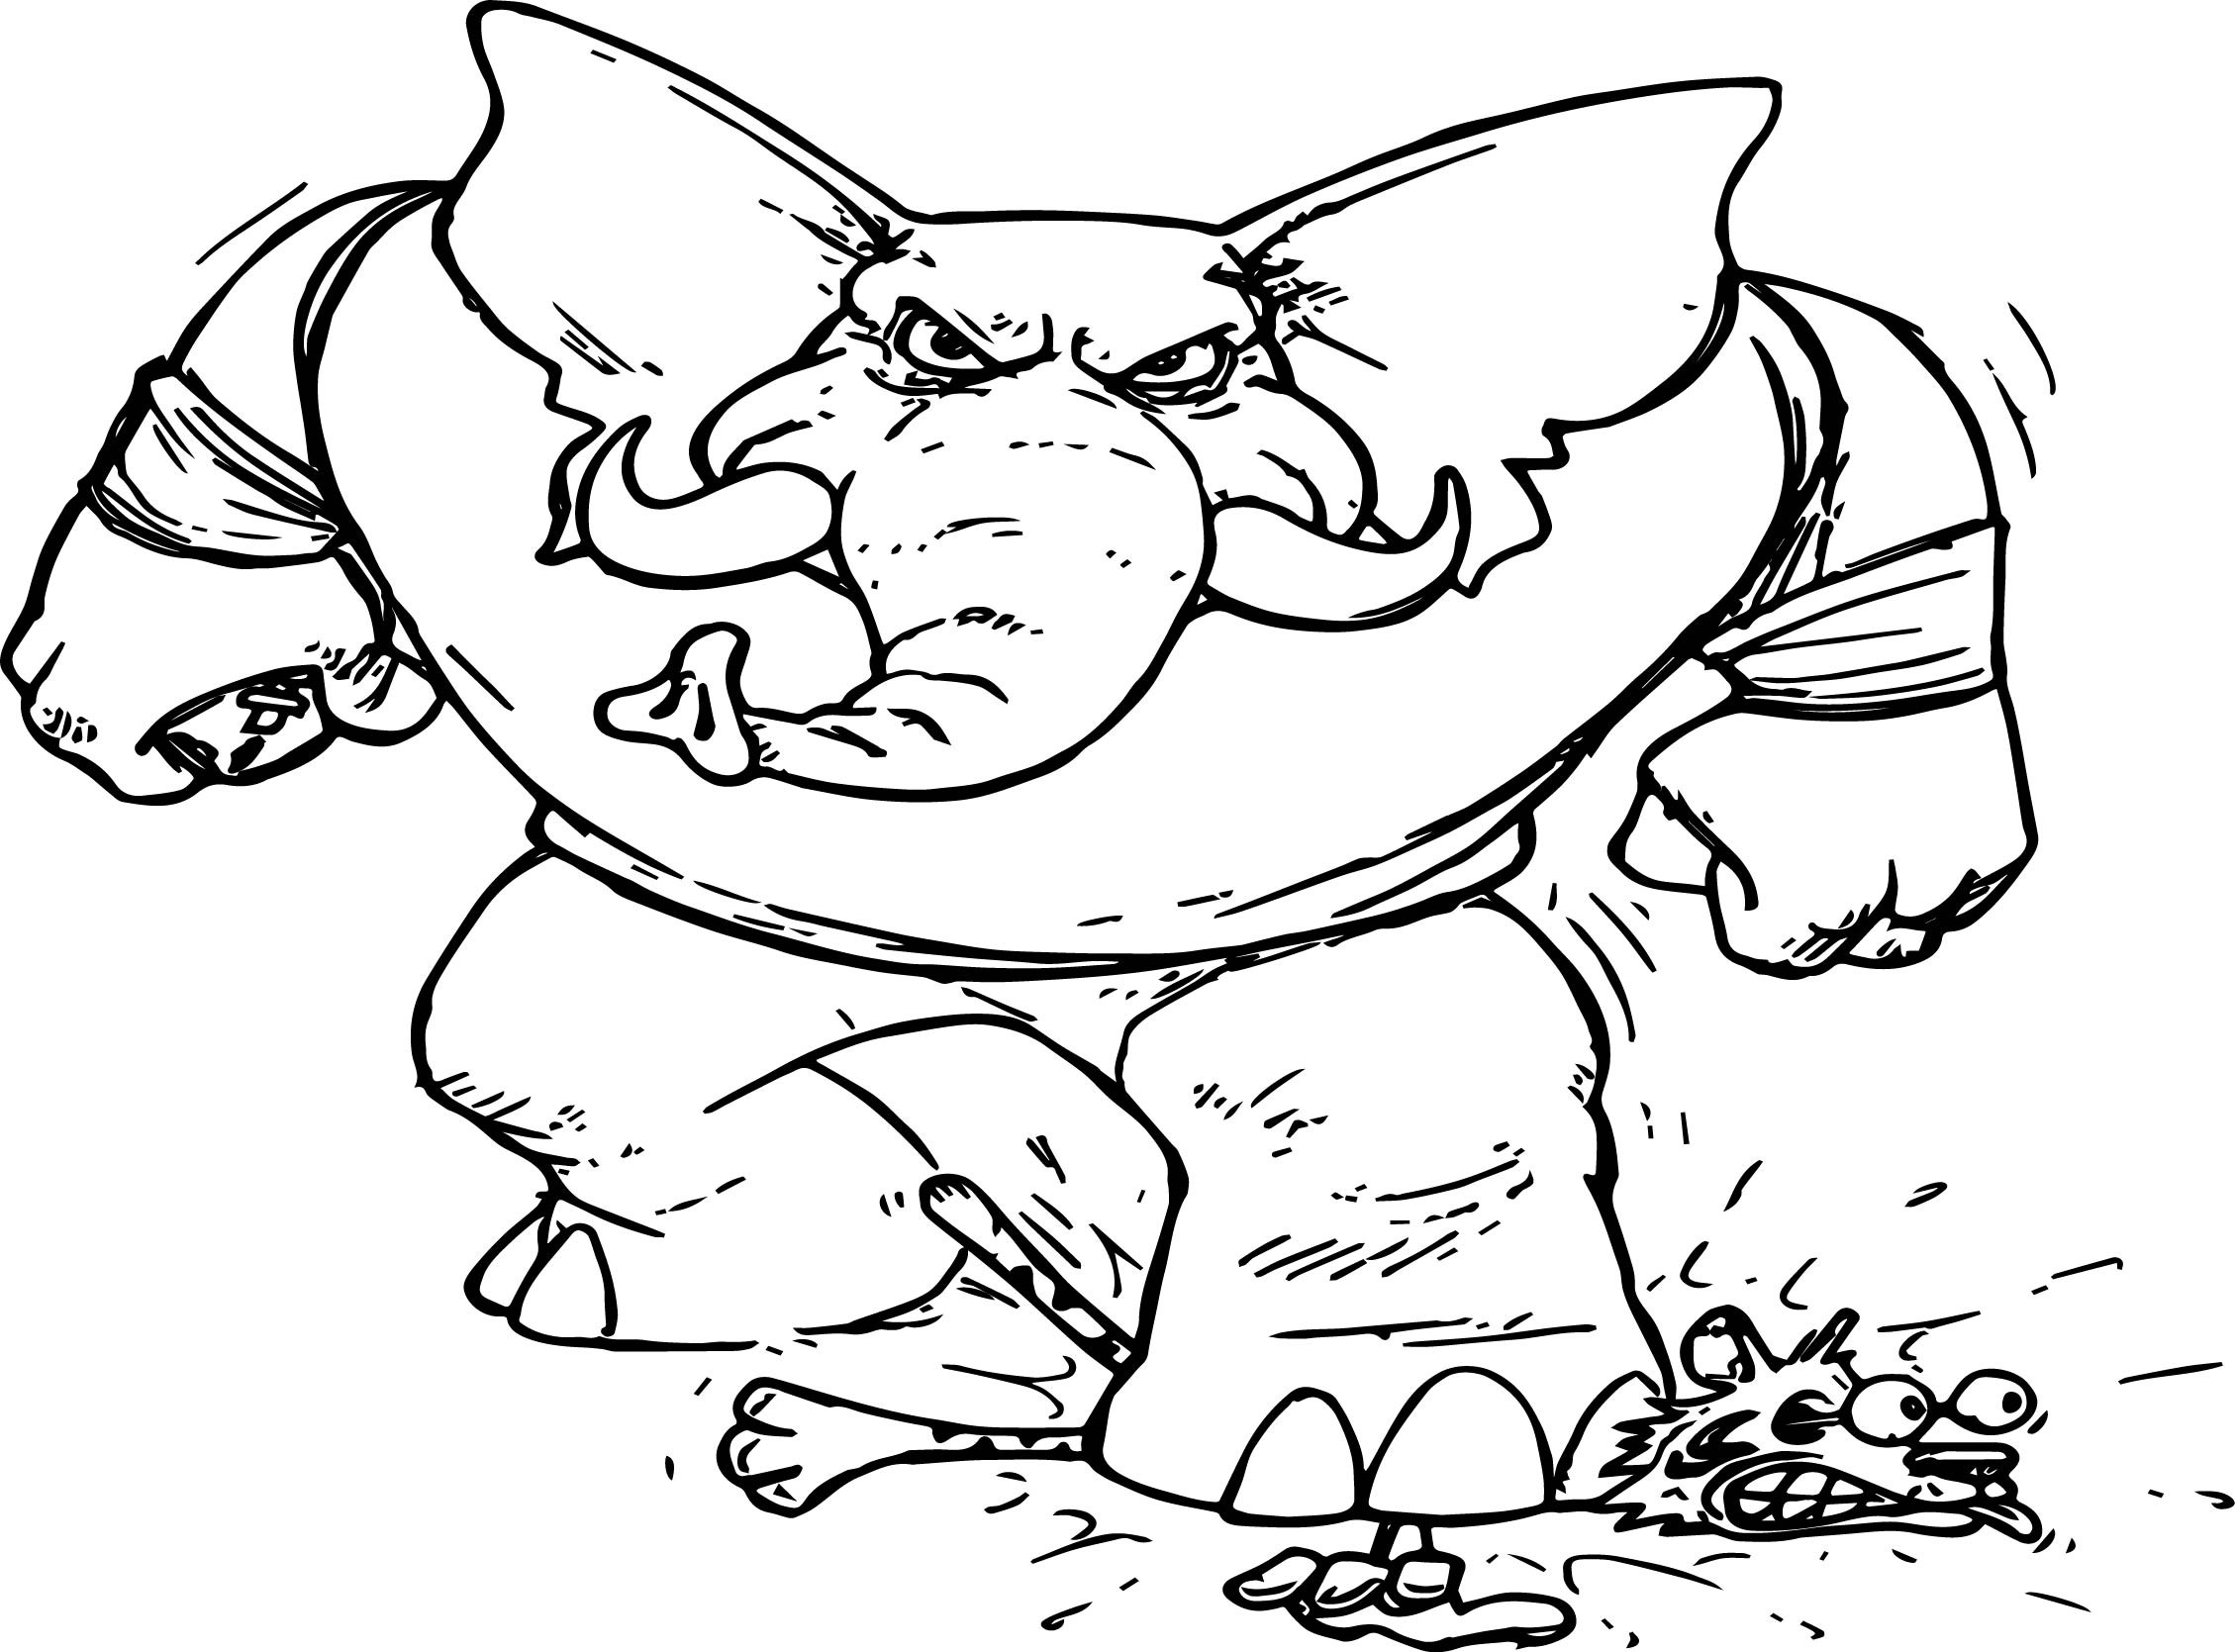 Alabama Football Coloring Pages
 Alabama Football Angry Elephant Coloring Page